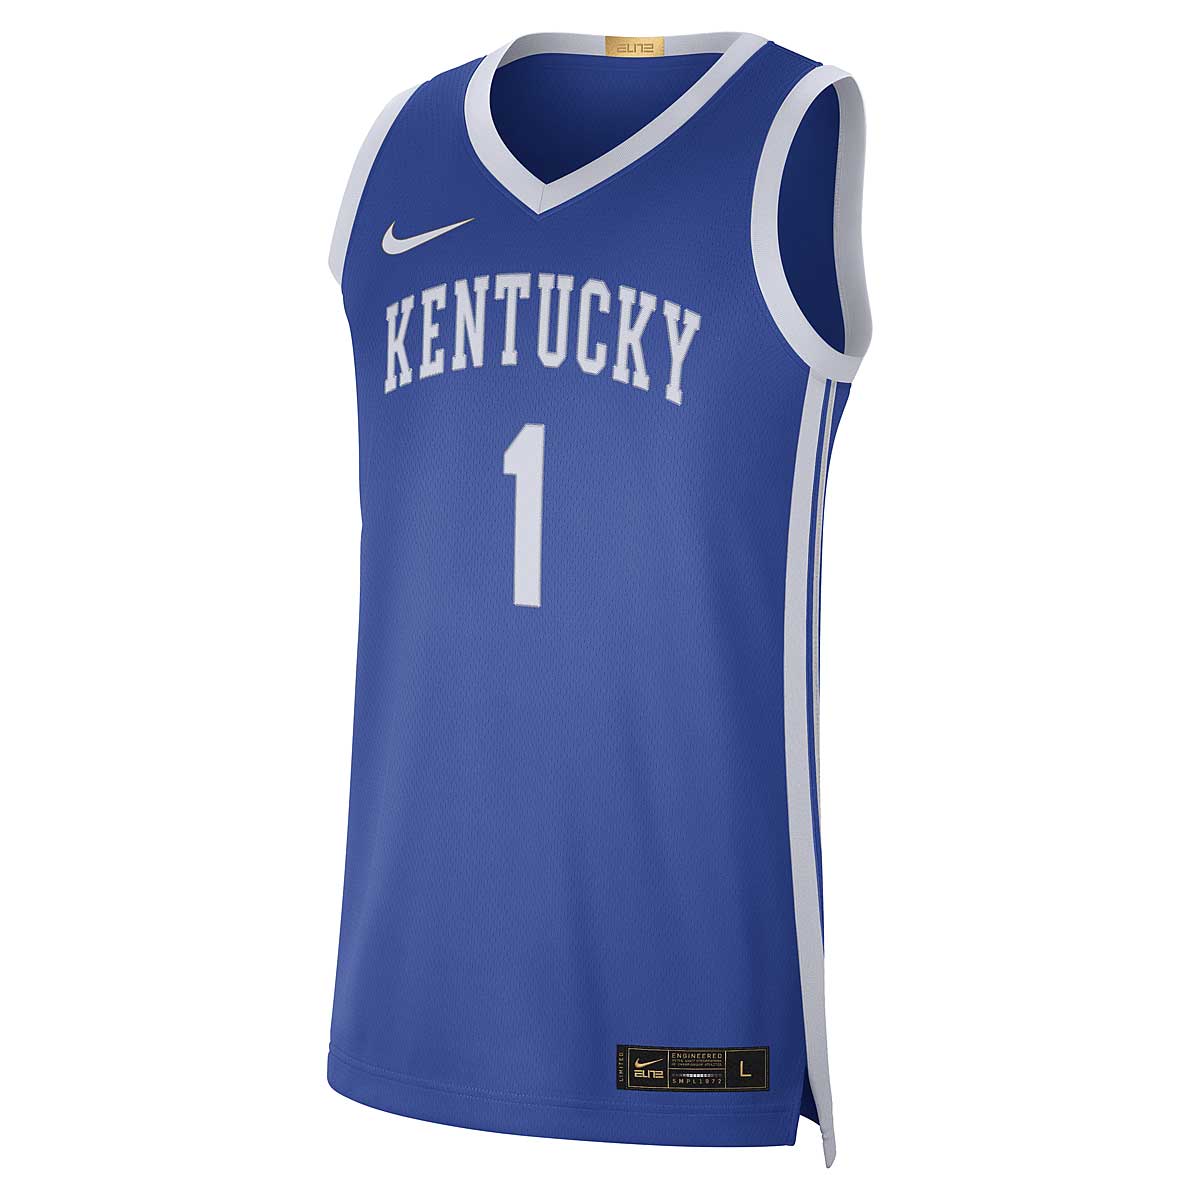 Nike Ncaa Kentucky Wildcats Dri-fit Limited Edition Jersey Devin Booker, Game Royal XL